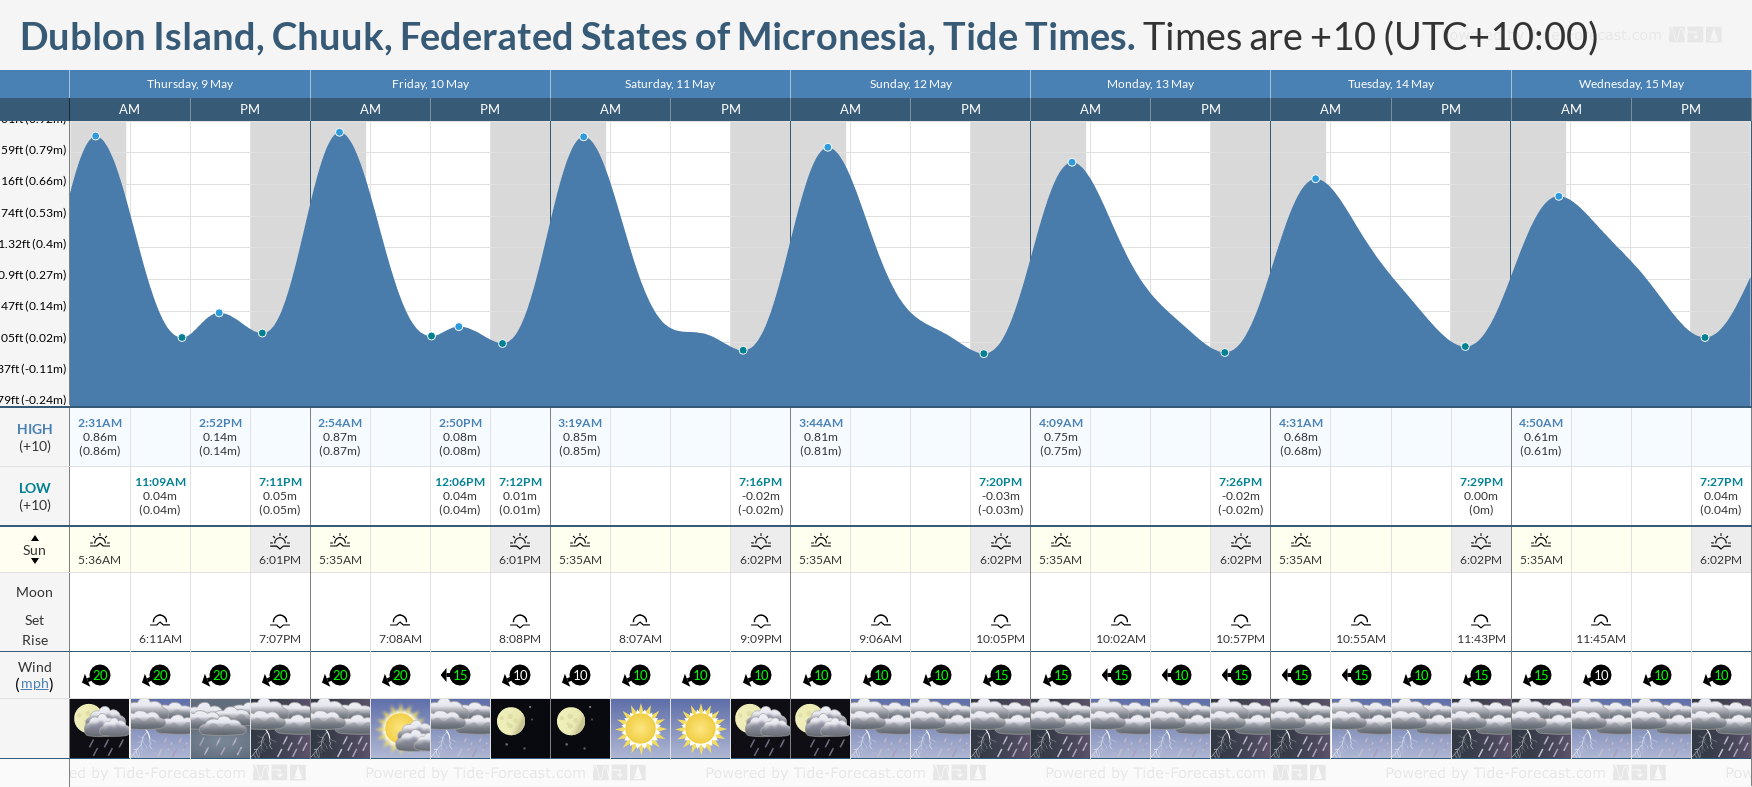 Dublon Island, Chuuk, Federated States of Micronesia Tide Chart including high and low tide tide times for the next 7 days